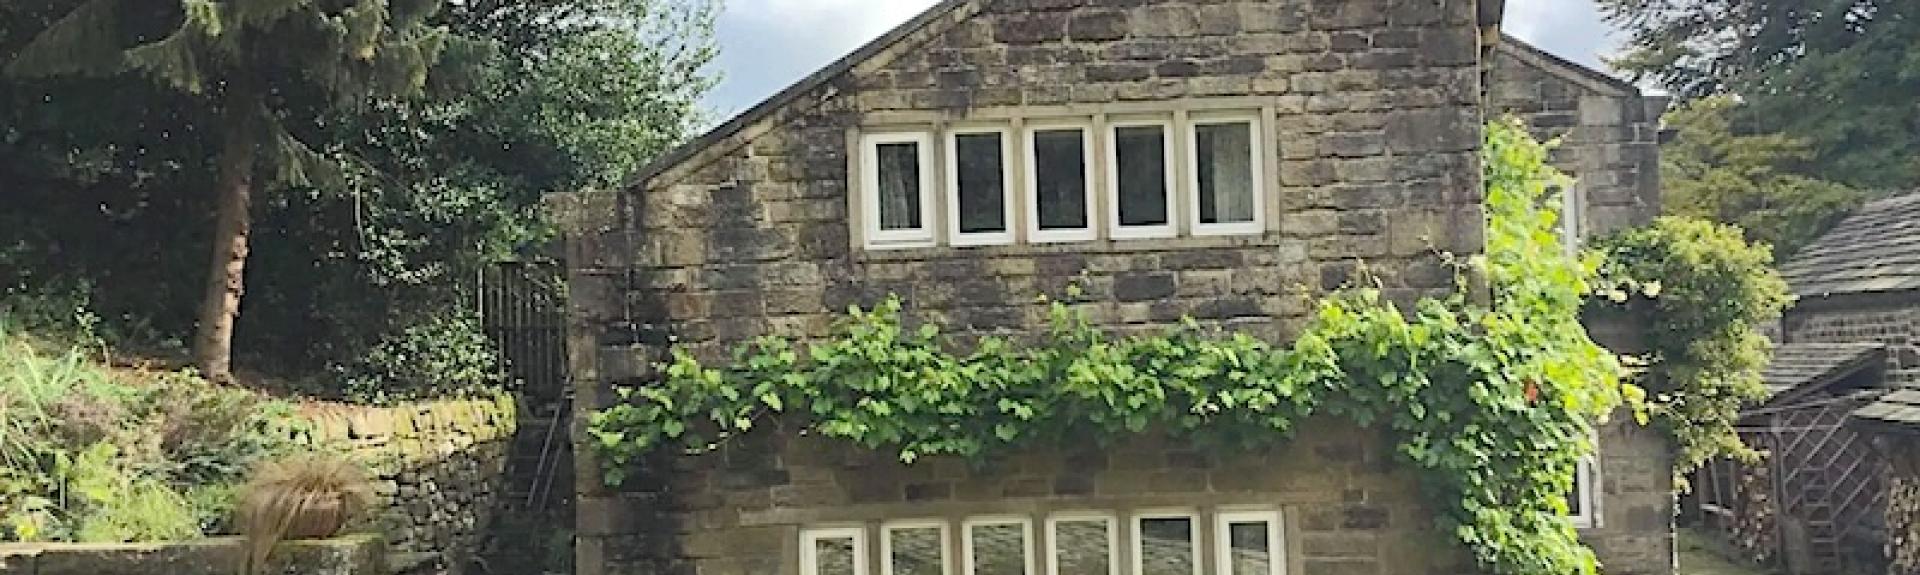 Wisteria-clad, gable end of a restored weavers cottage with two rows of windows in The Pennines.